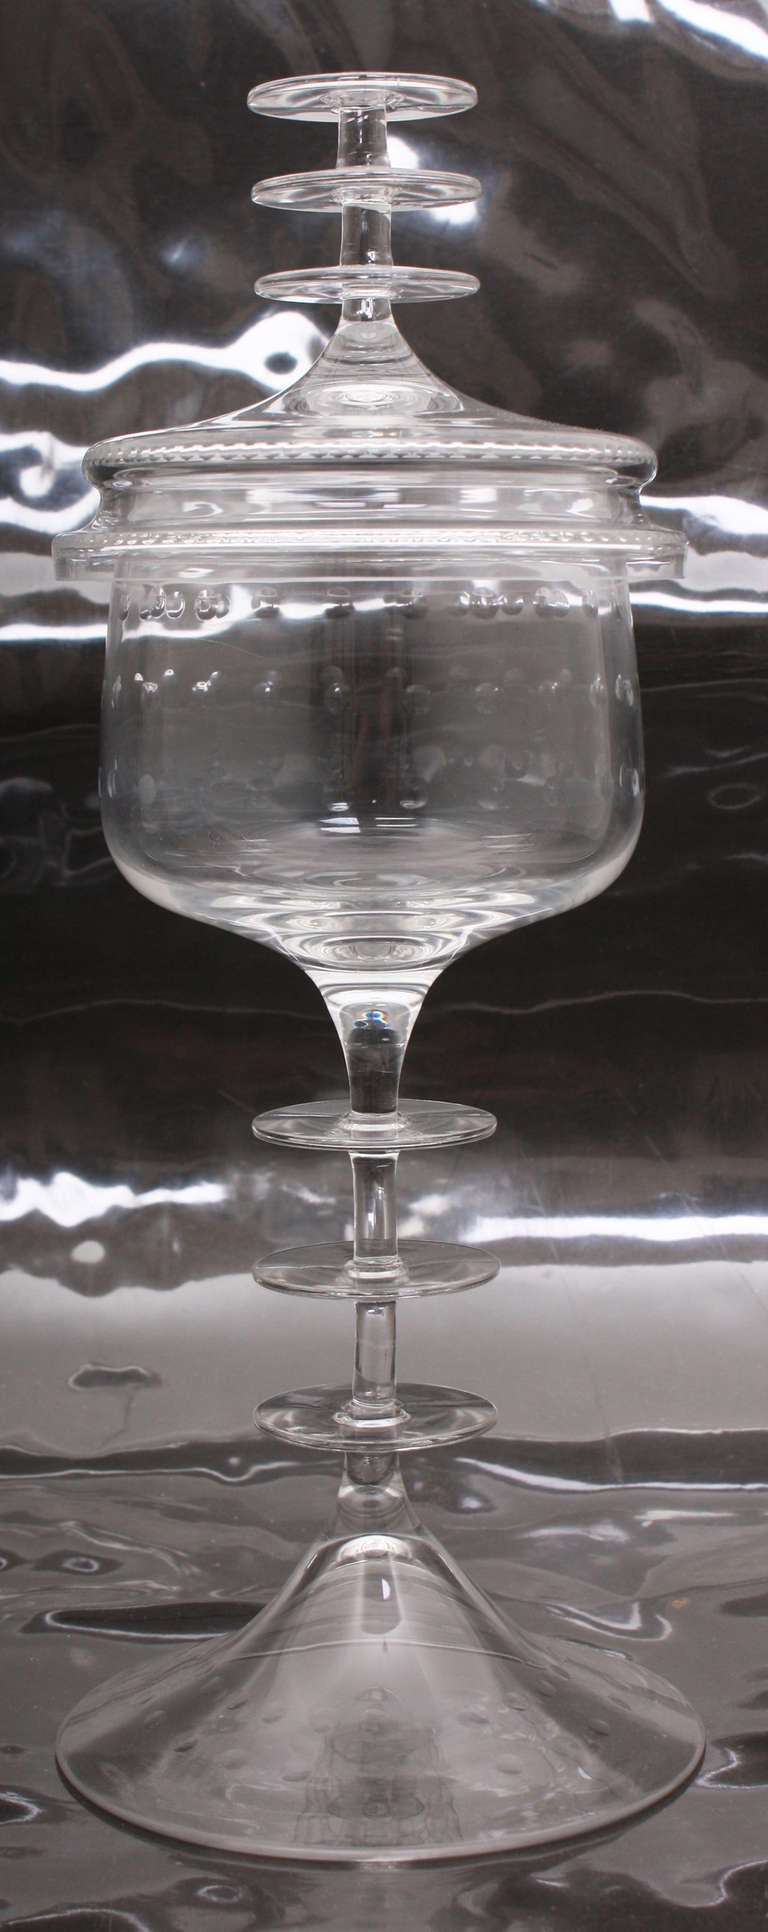 The molded clear glass circular wheel with cut design on flaring base and main body, three discs intersecting the stem; the finial comprised of same discs. This piece is from the R. F. Schwarz collection, one of the west coasts top designers for